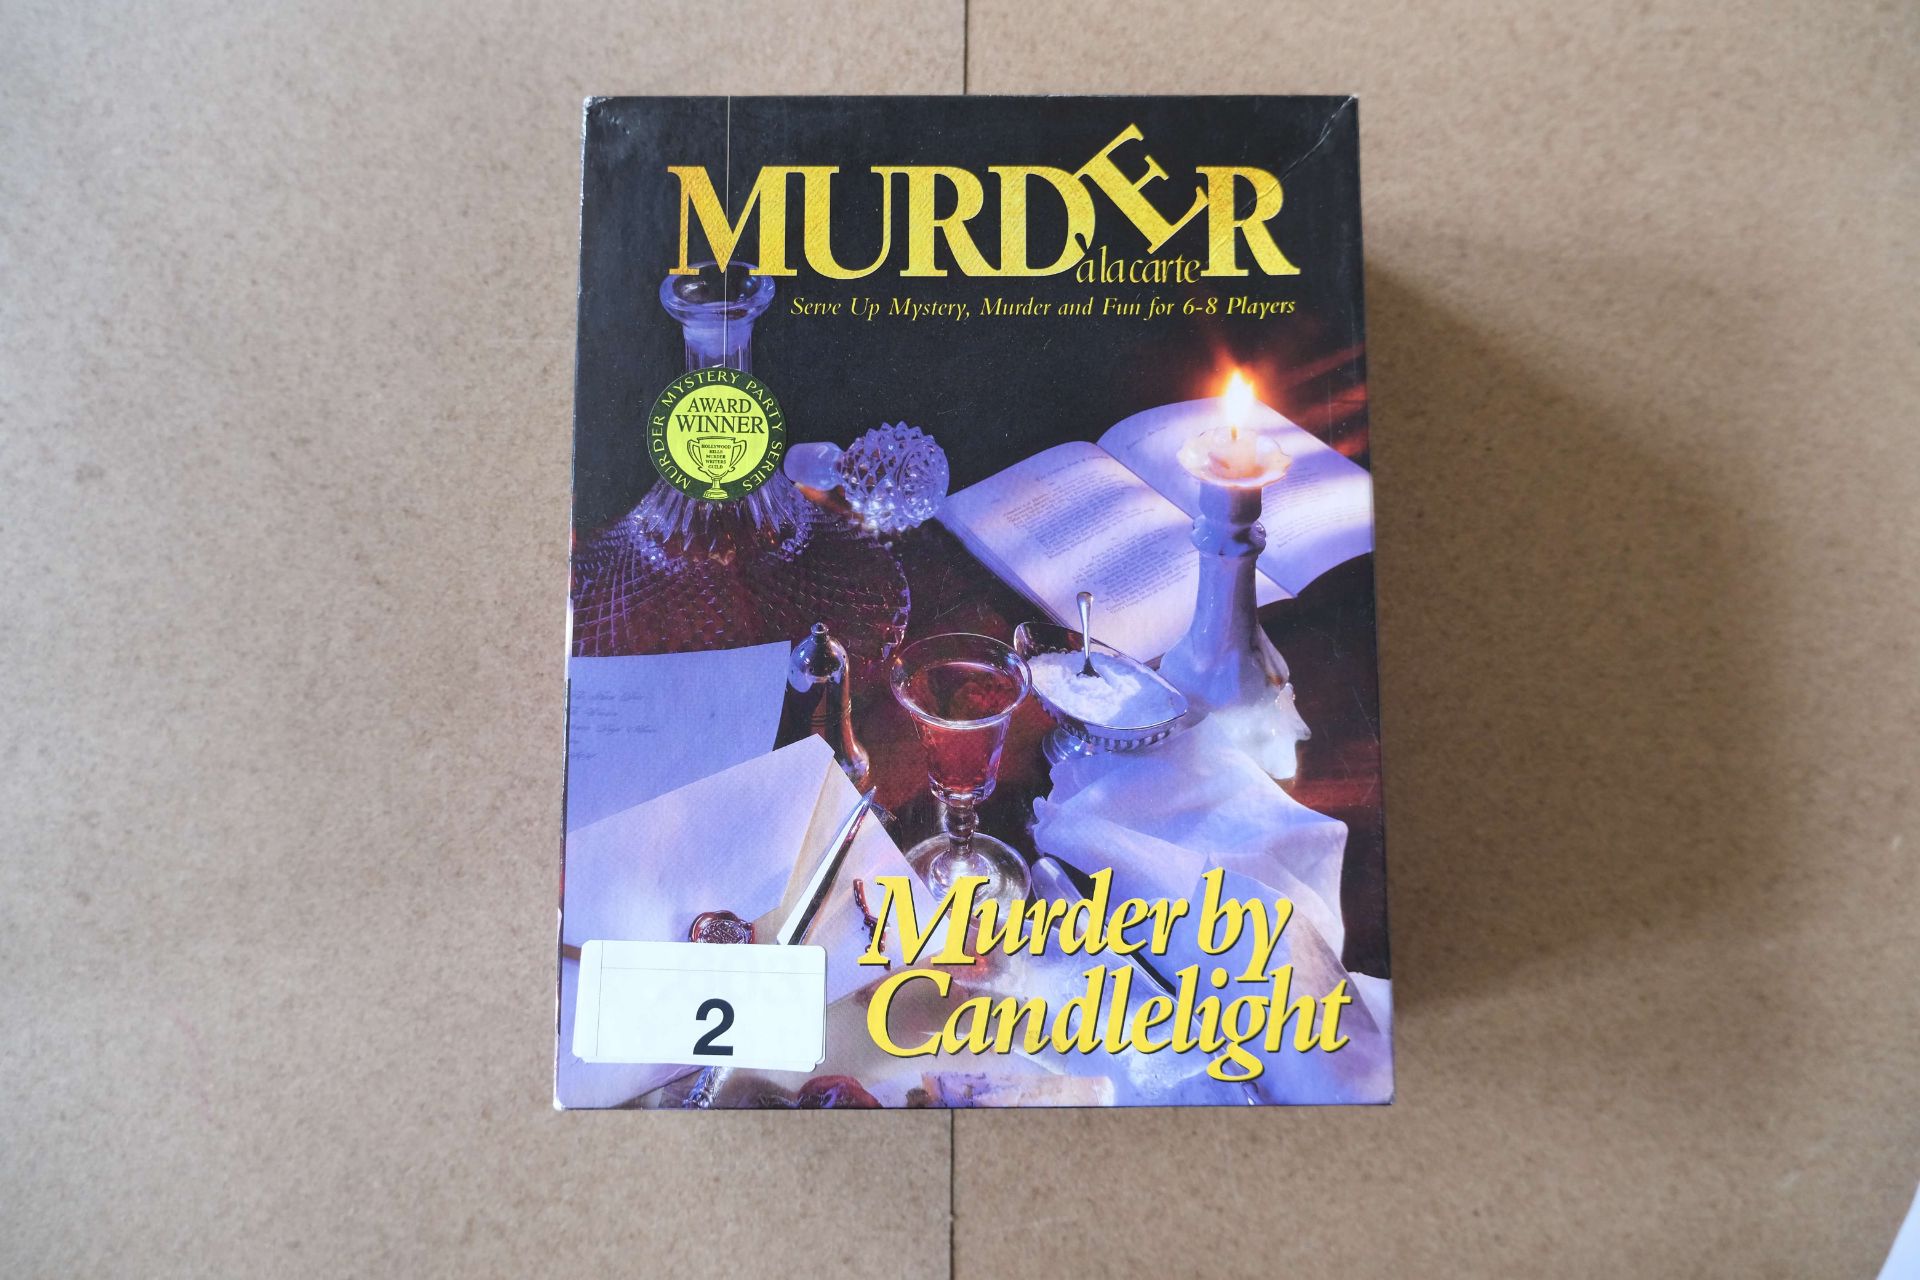 Murder Mystery - Murder by Candlelight